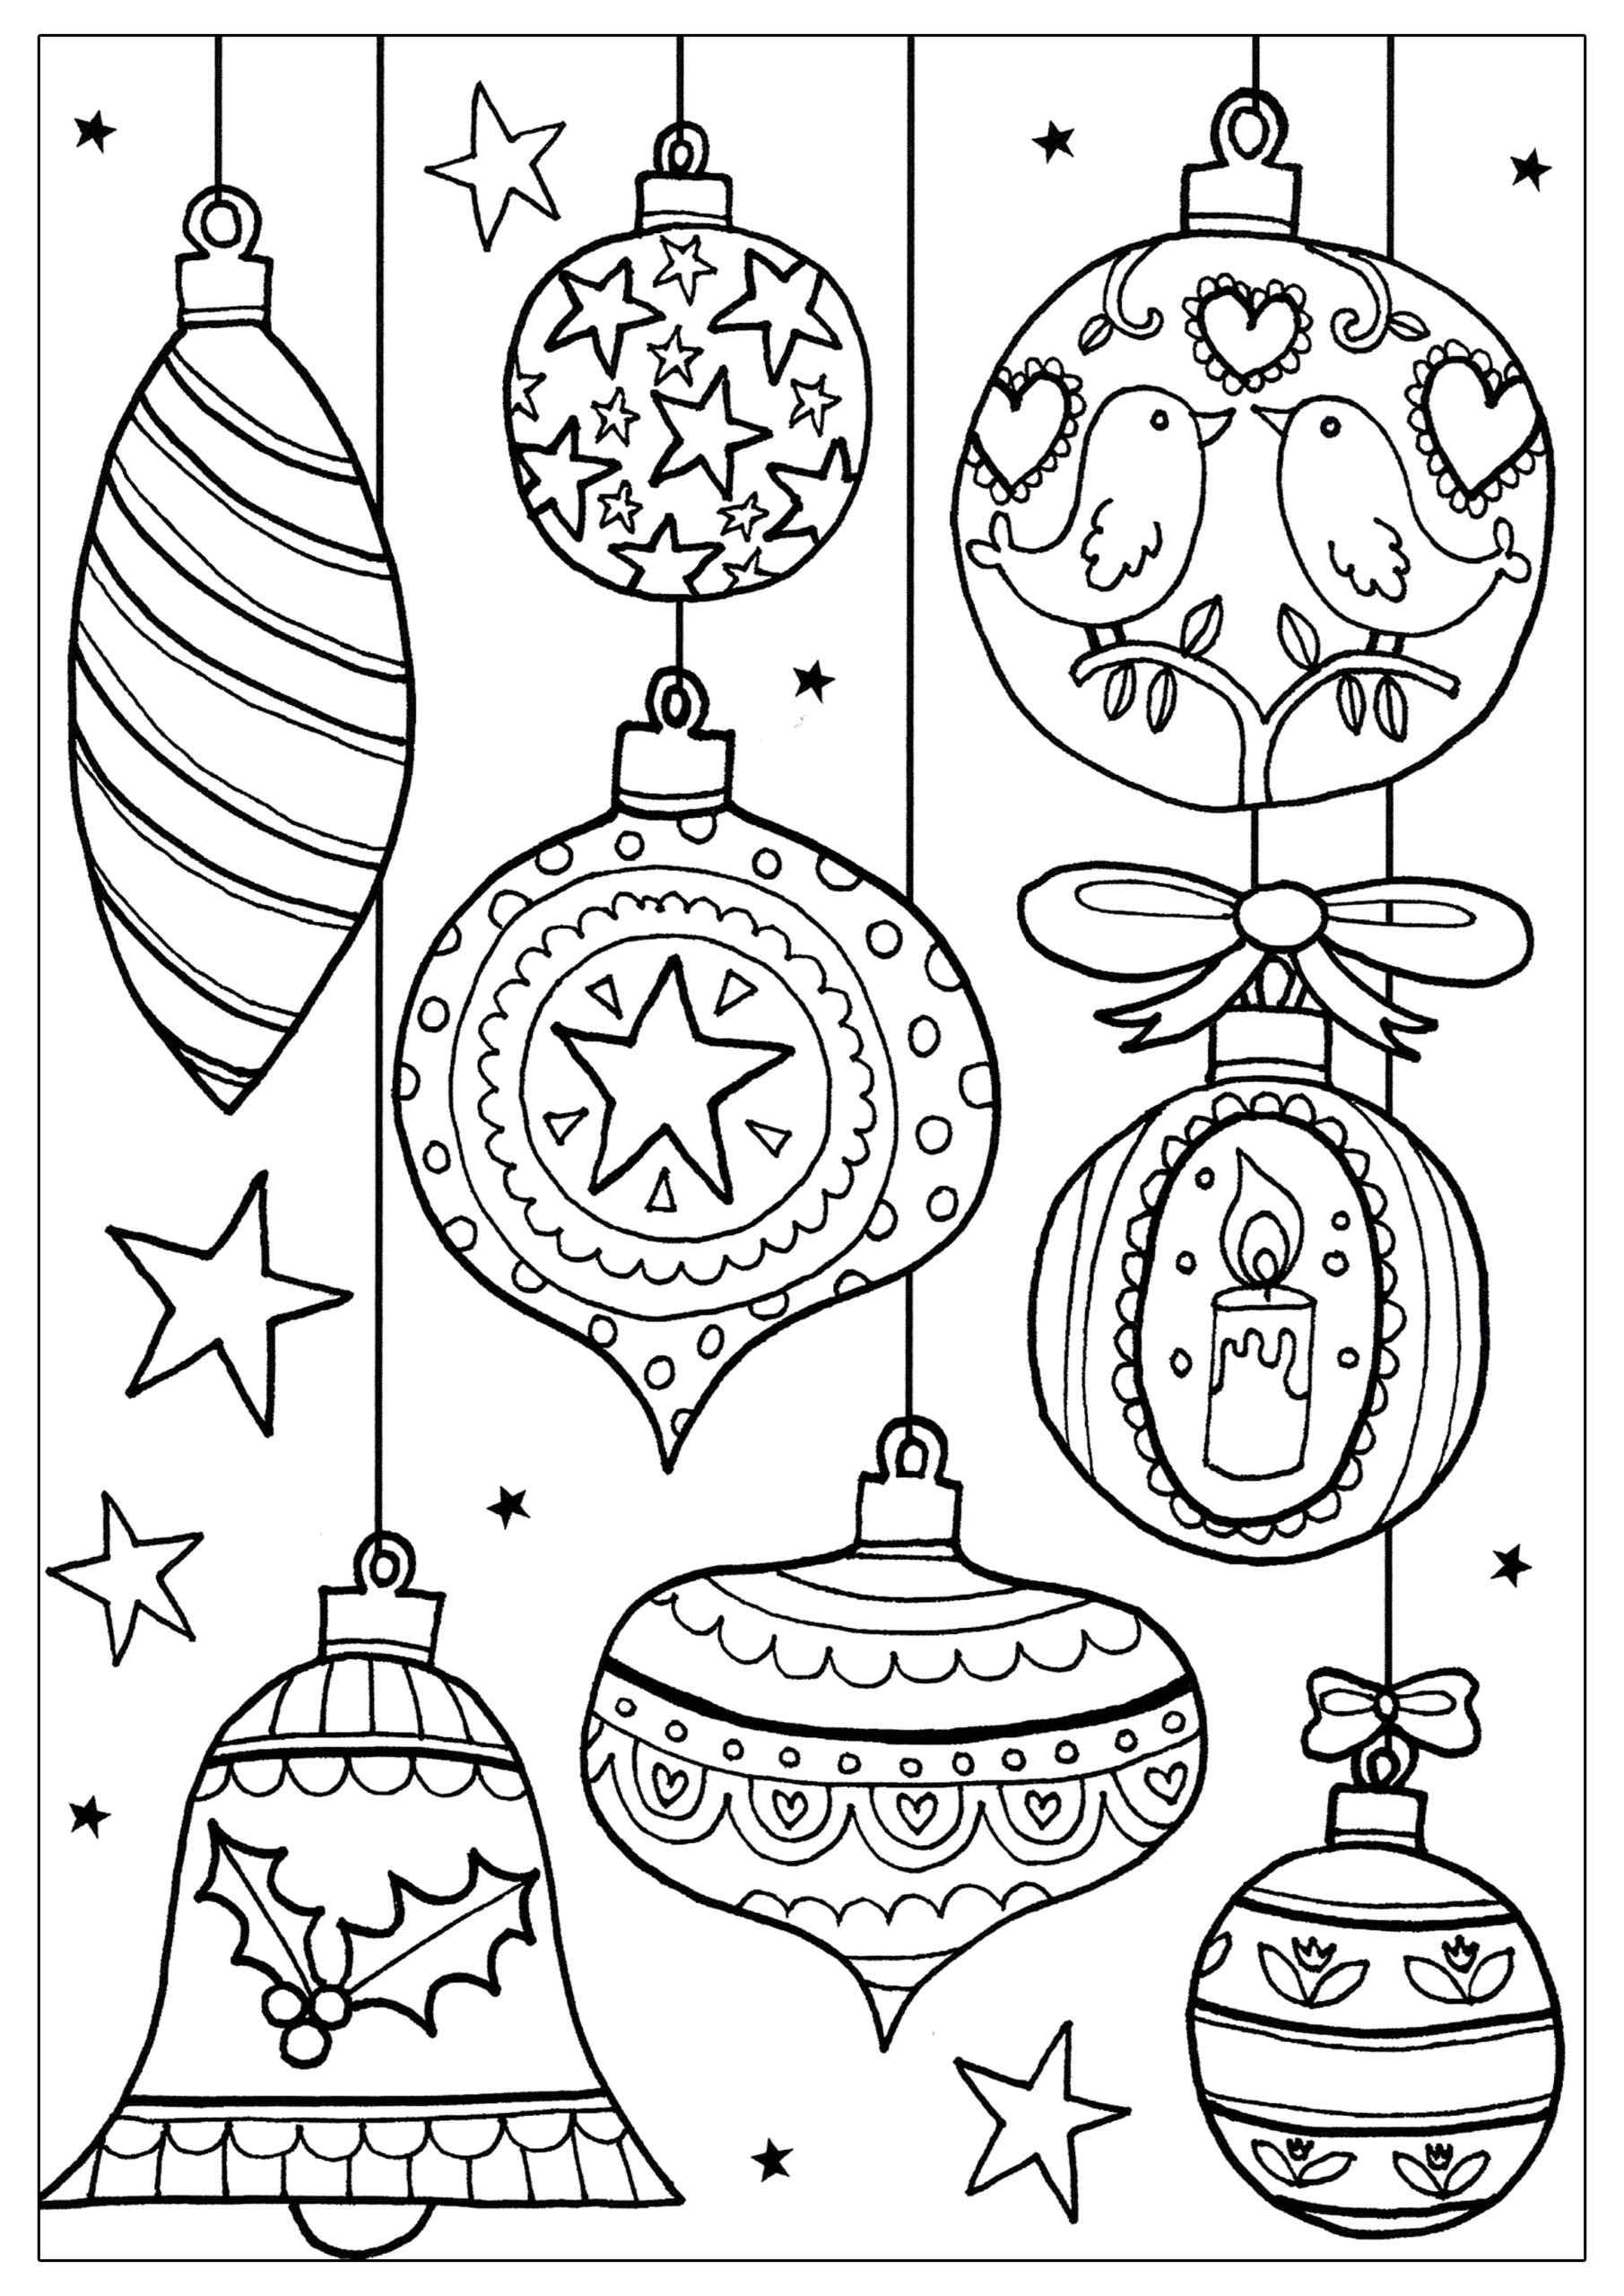 Glass Balls Decorated With Christmas Ornaments Coloring Page